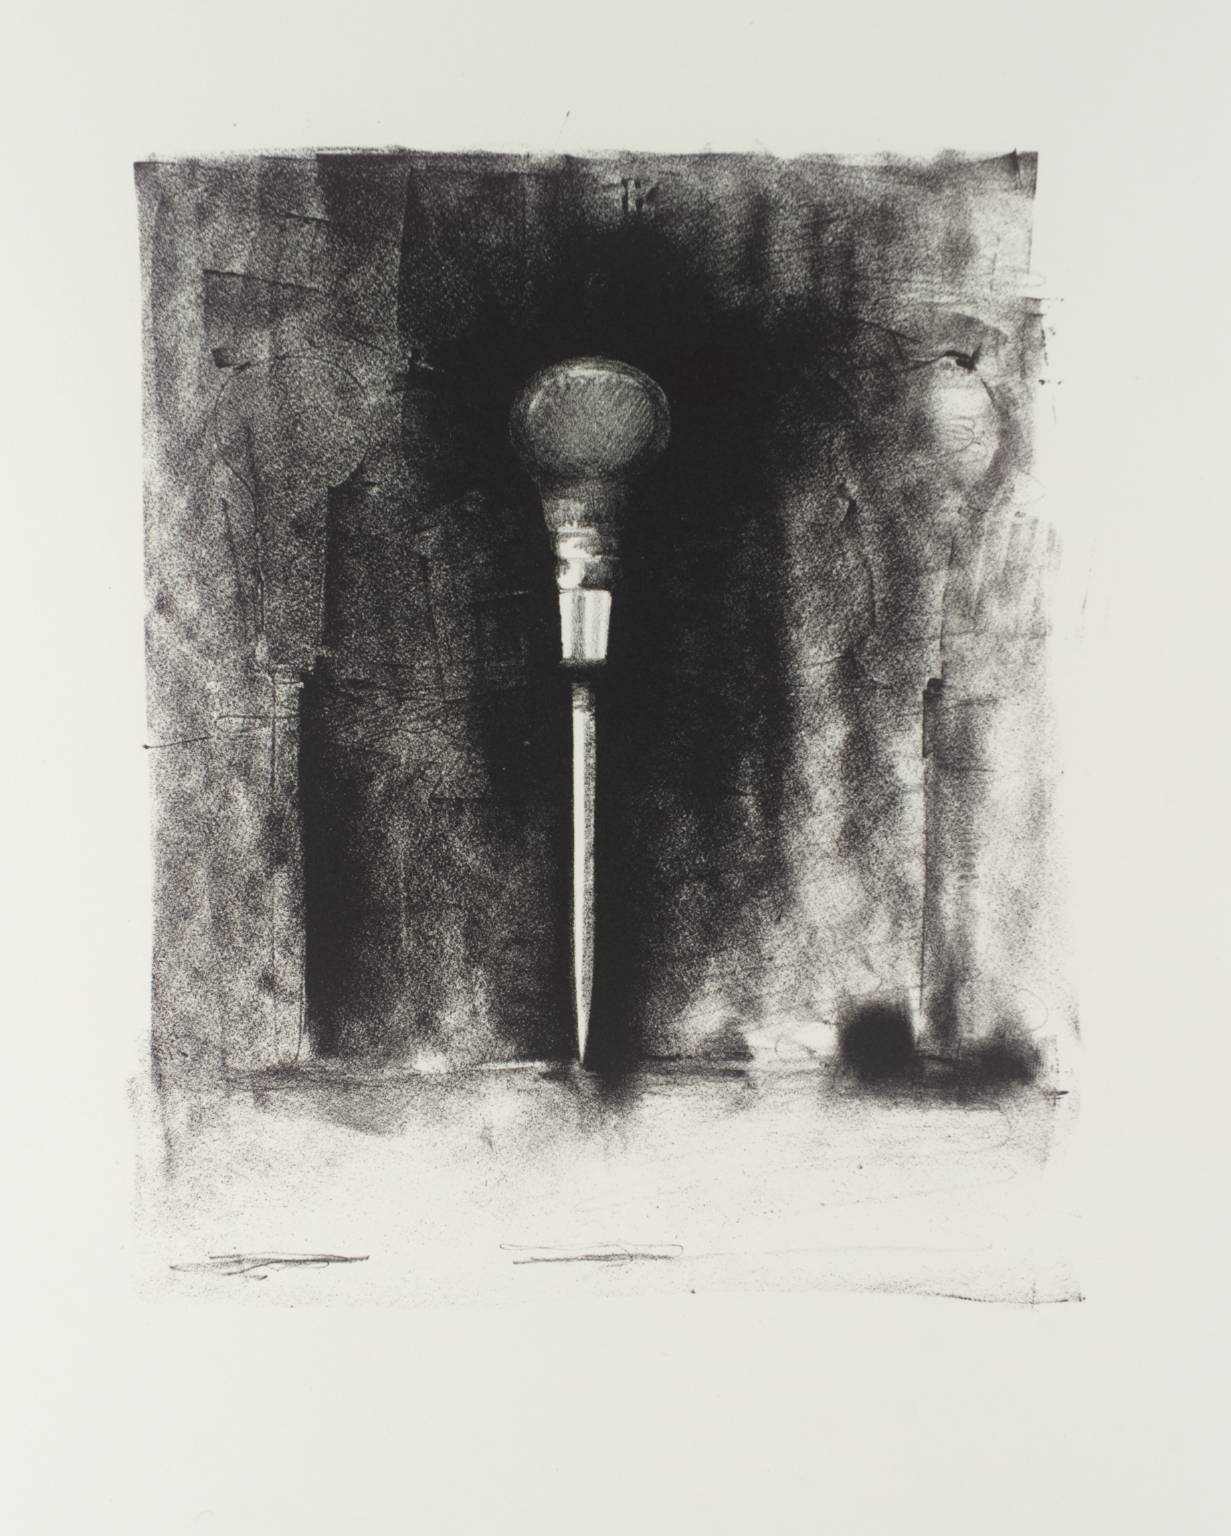 [no title] 1973 Jim Dine born 1935 Presented by the artist 1980 http://www.tate.org.uk/art/work/P02531